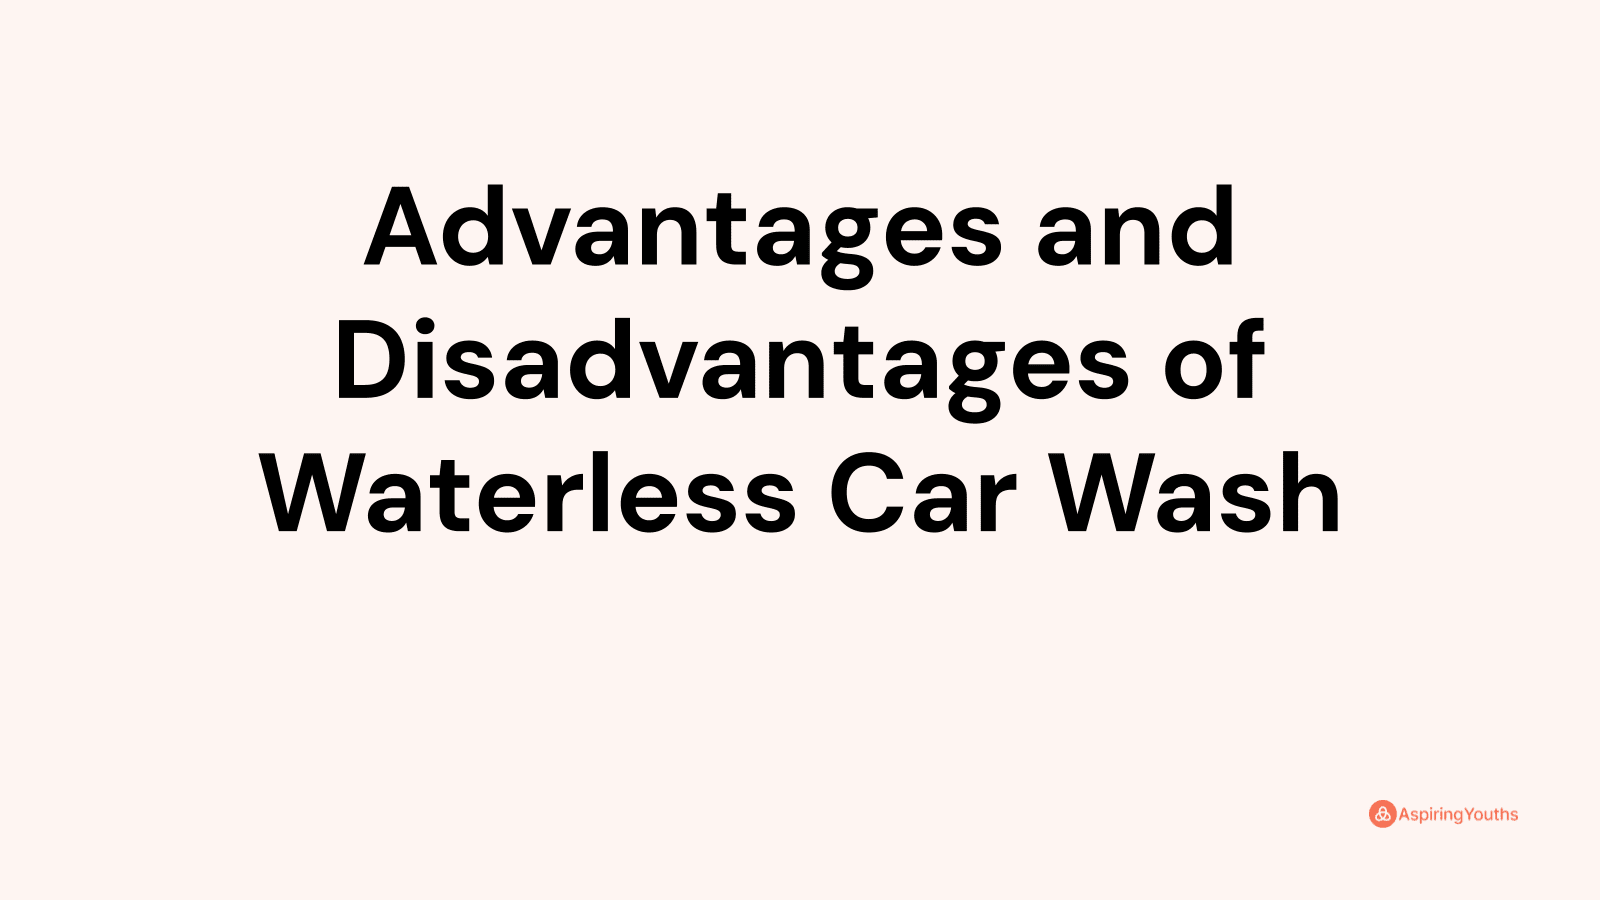 Advantages and disadvantages of Waterless Car Wash